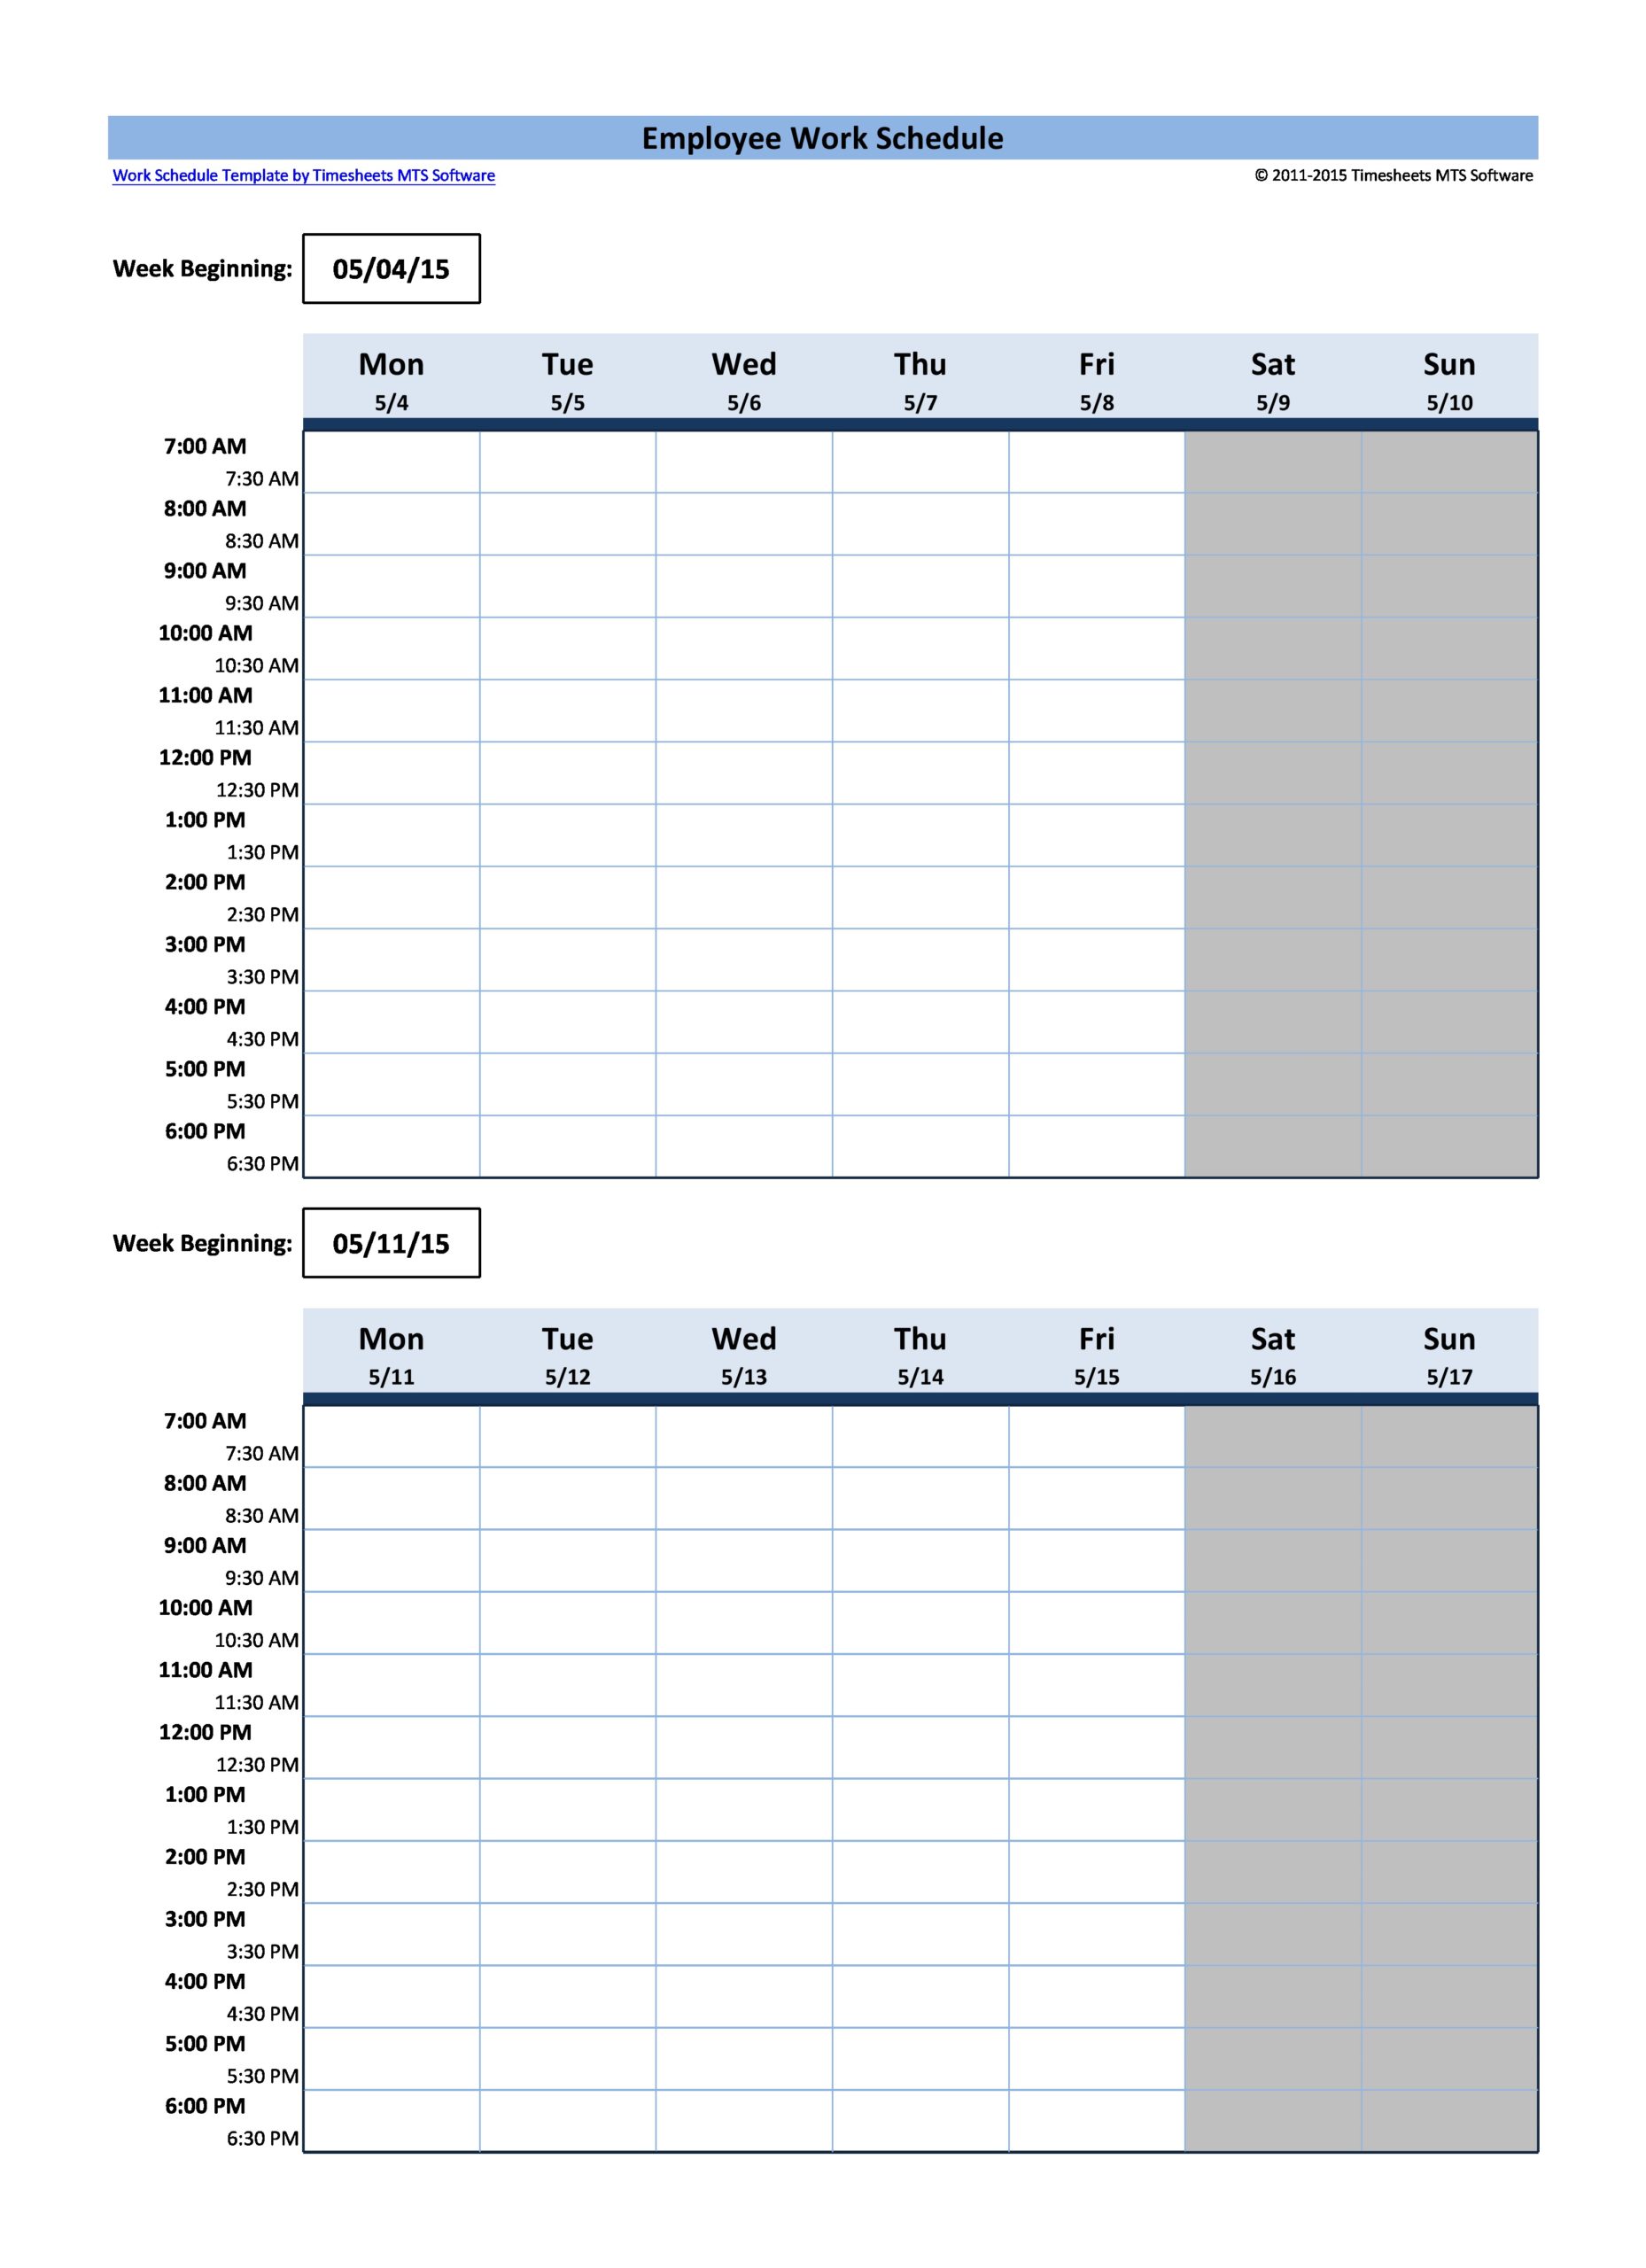 40 Free Employee Schedule Templates (Excel & Word) ᐅ TemplateLab